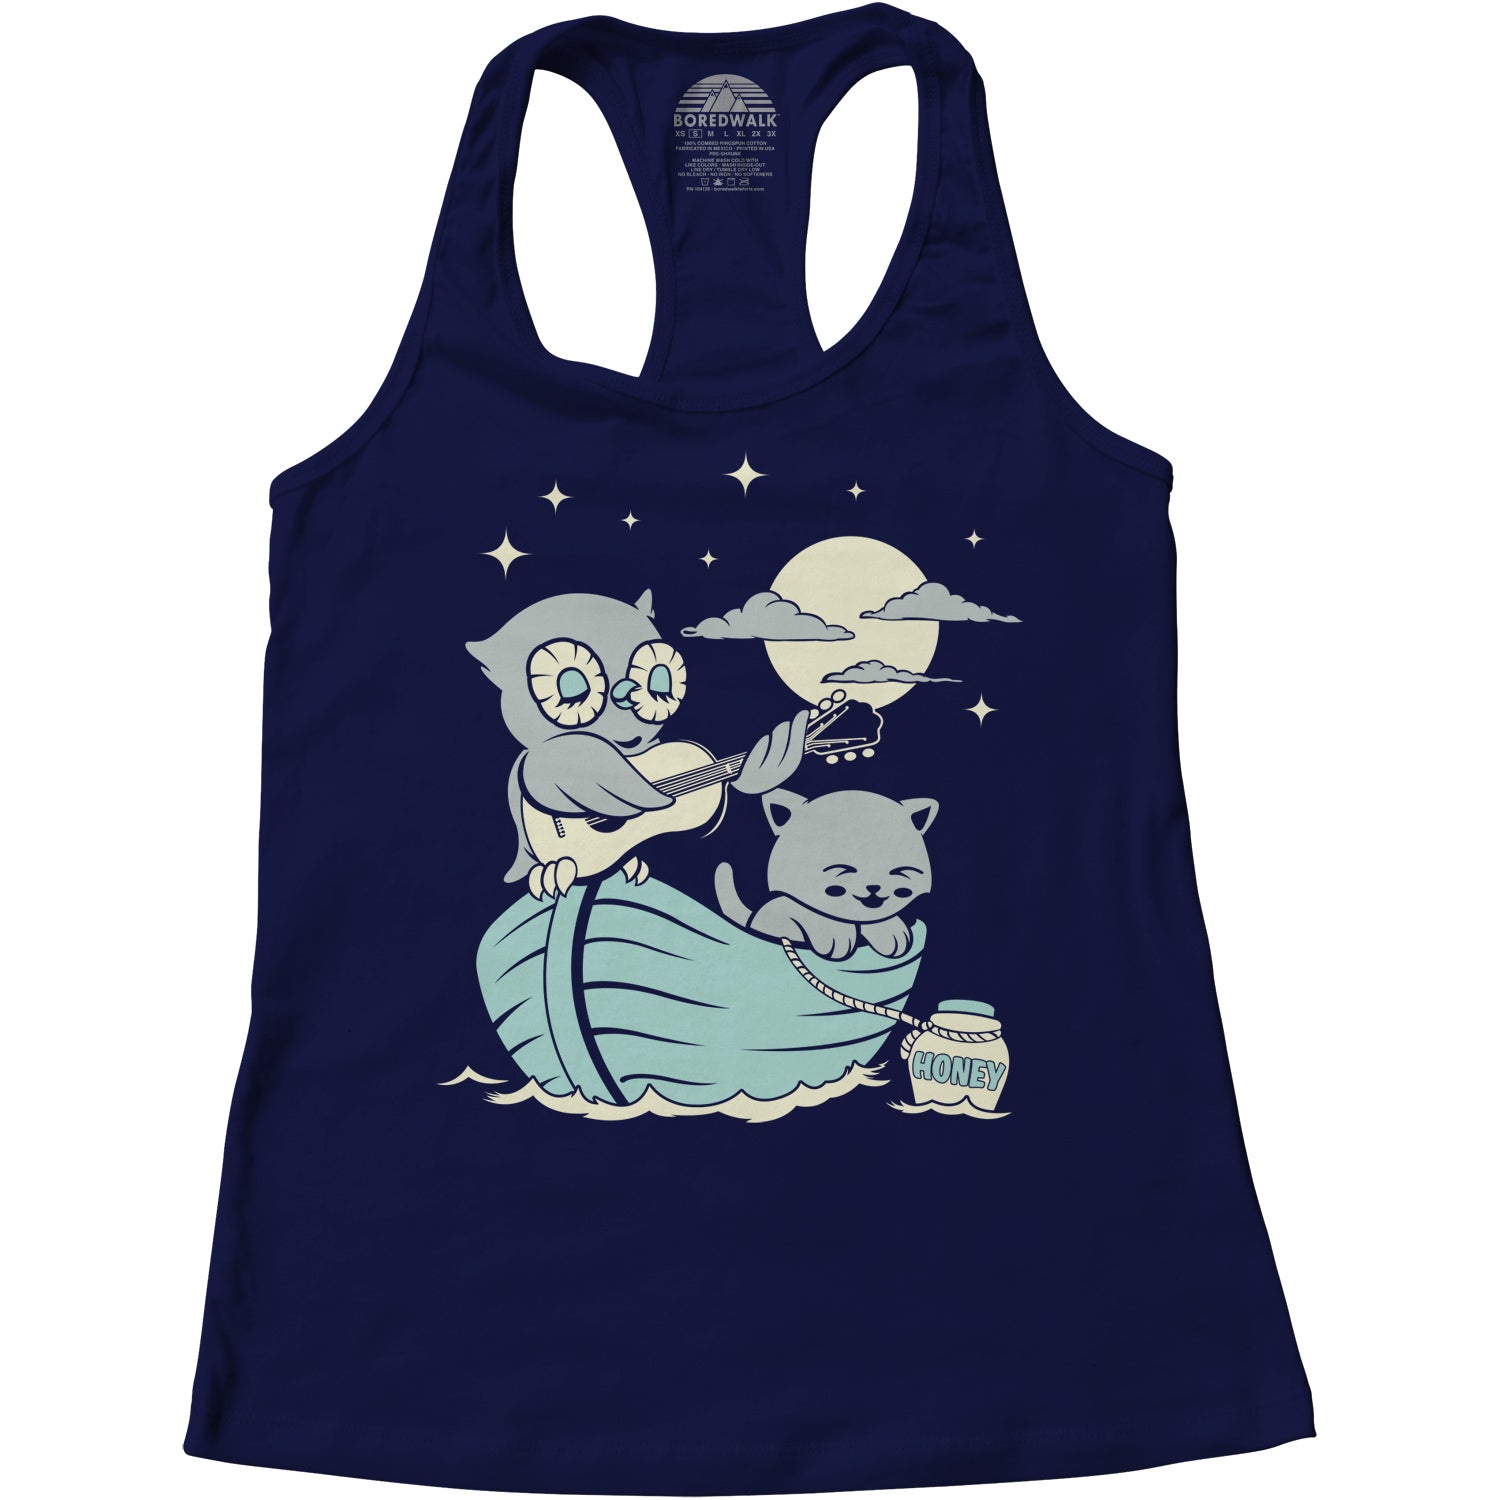 Women's The Owl And the Pussycat Racerback Tank Top